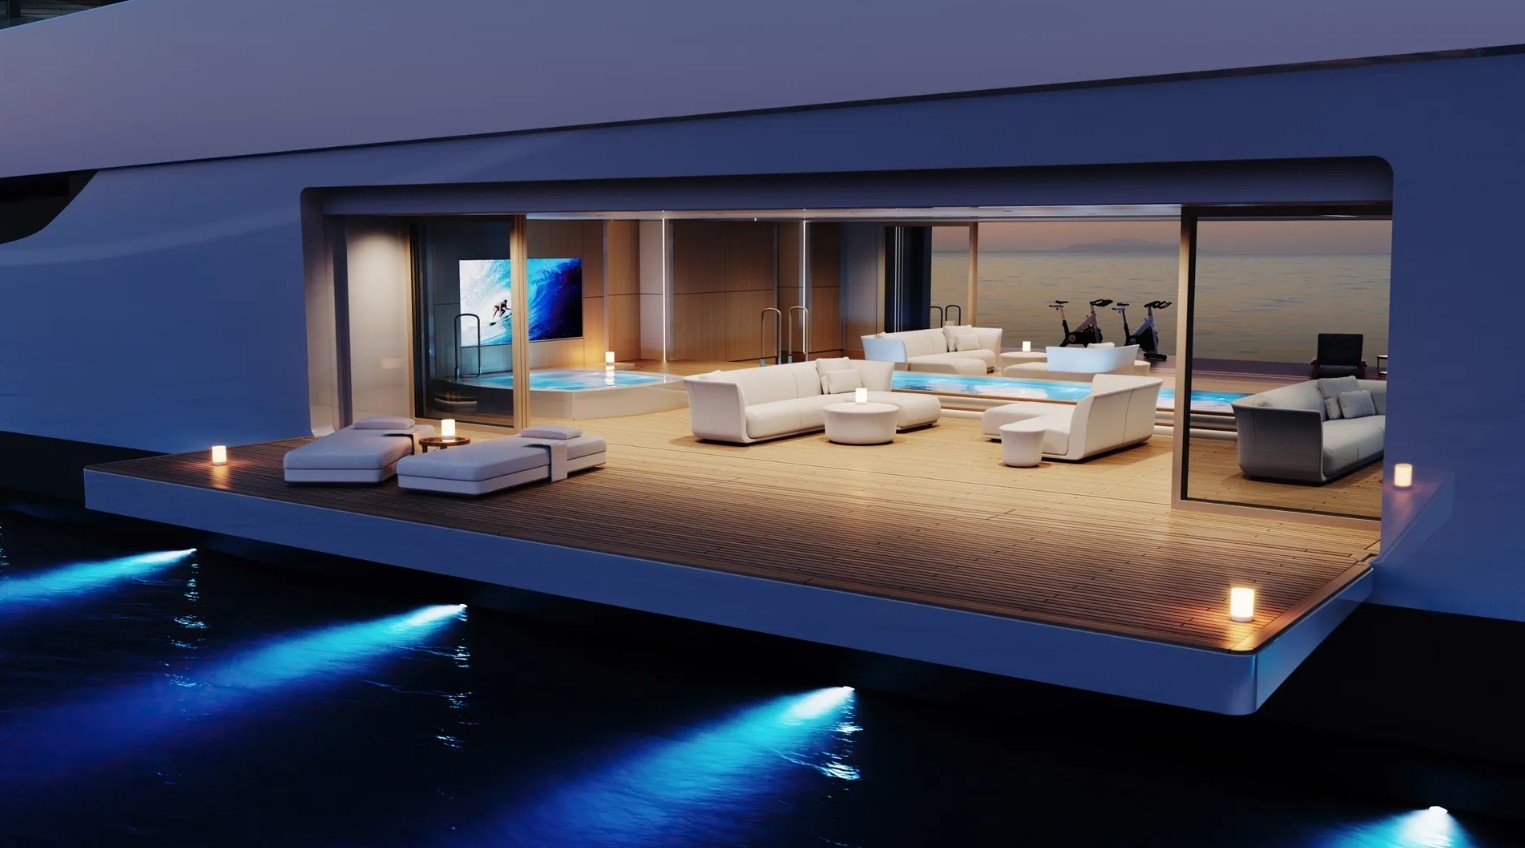 feadship unveils expv a 285 foot superyacht concept with a floating glass bridge 2